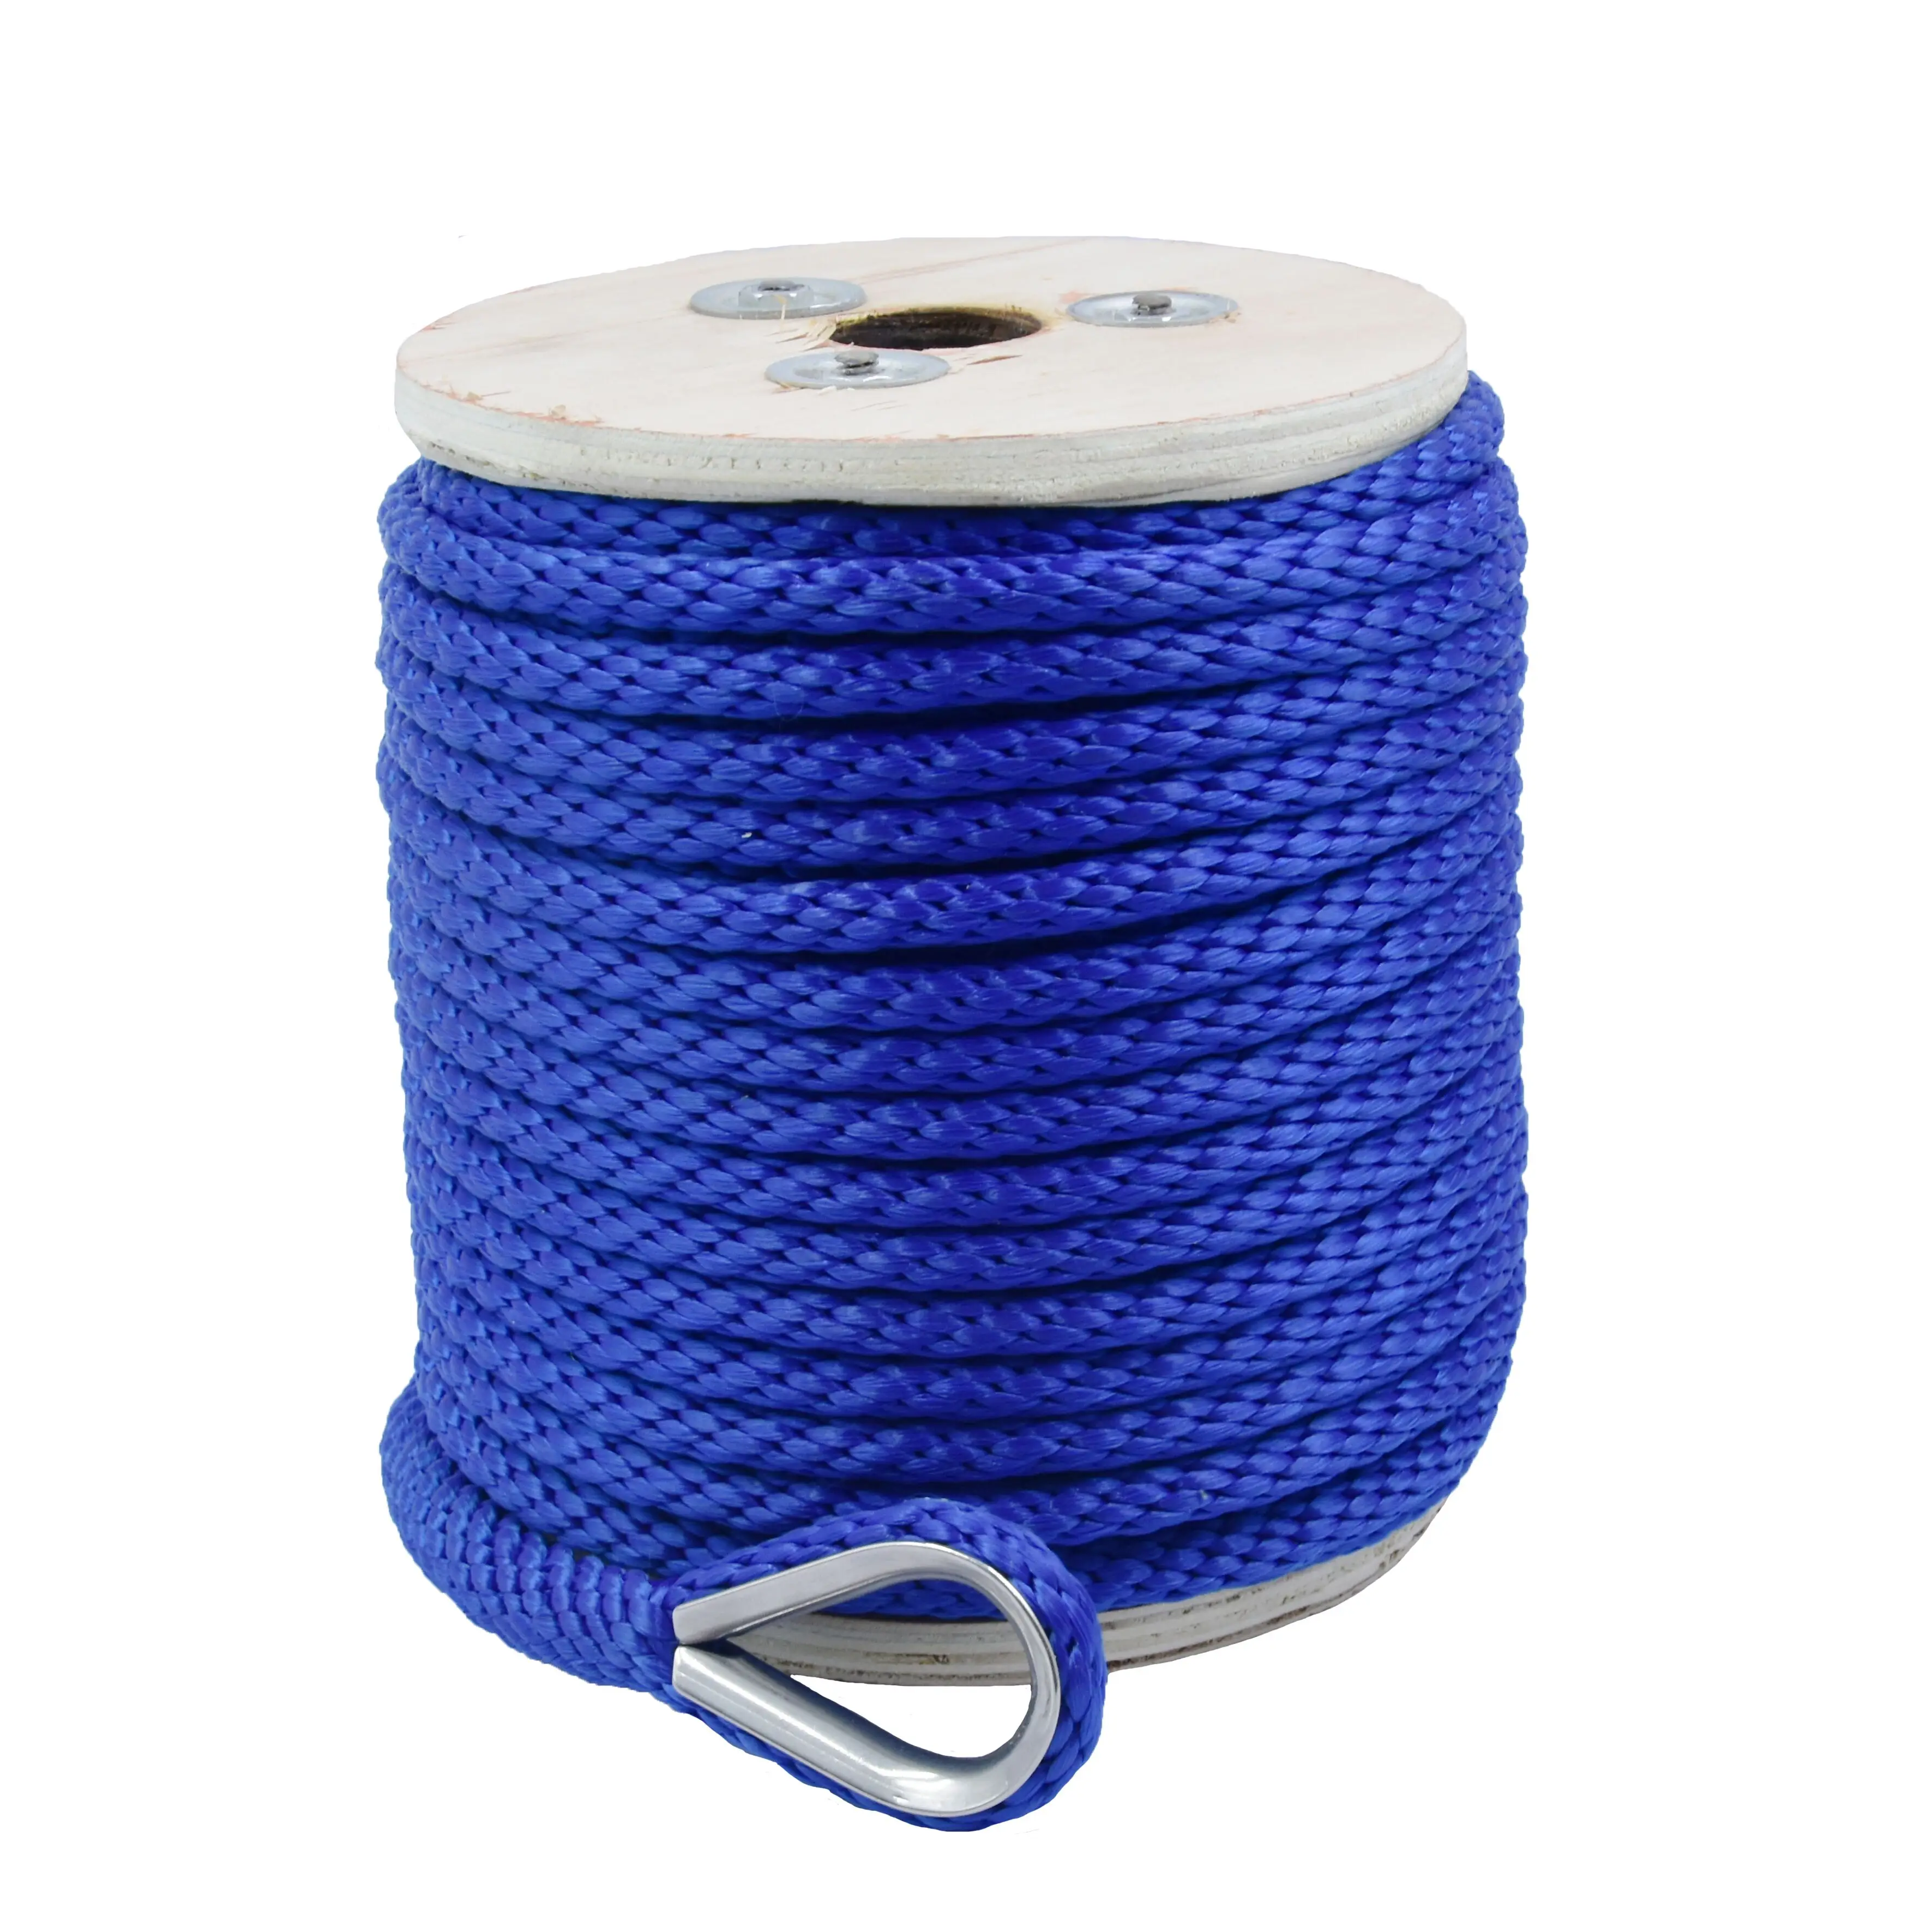 High performance hot sale customized package and size solid braided polypropylene/ PP mooring marine anchor rope